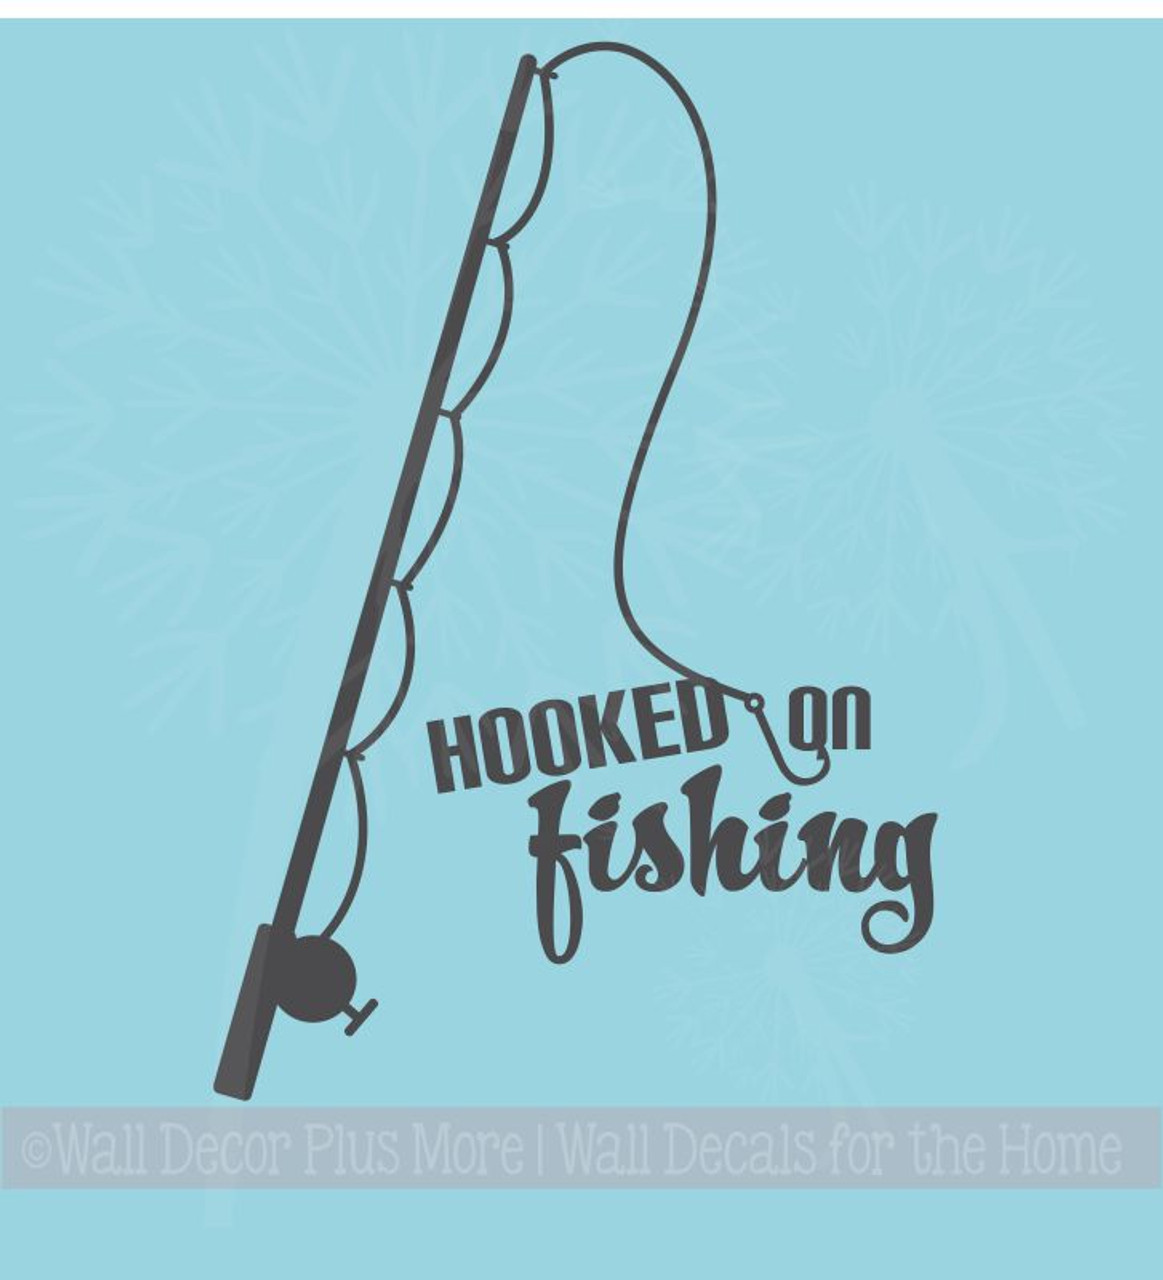 Fisherman Art Decor Hooked on Fishing Wall Decal Sticker with Fish Pole